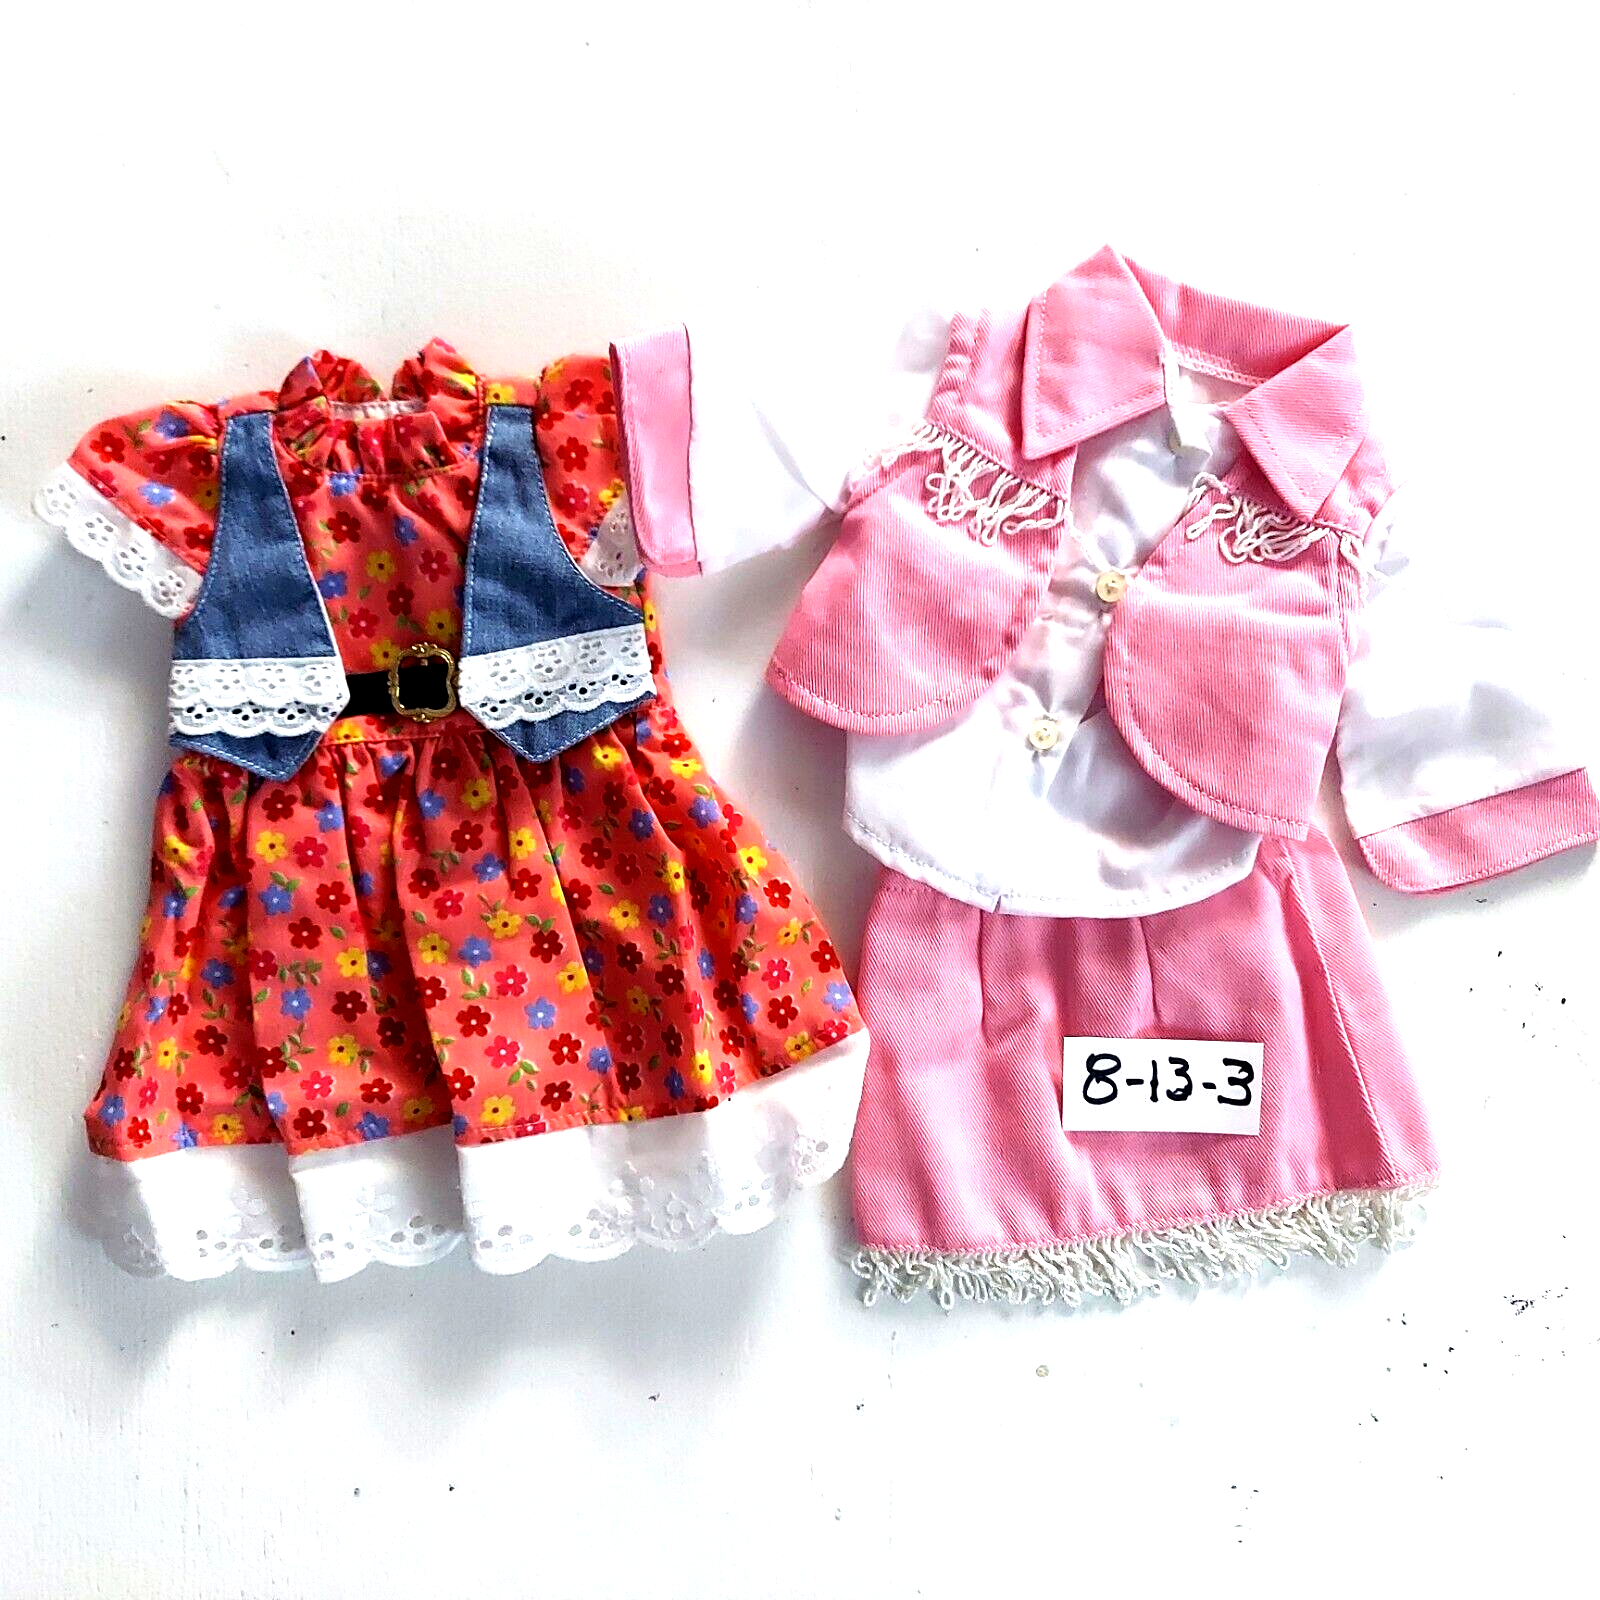 Doll Clothes # 8-13-3 fits 18inch American Girl, Lot american doll clothing does not apply